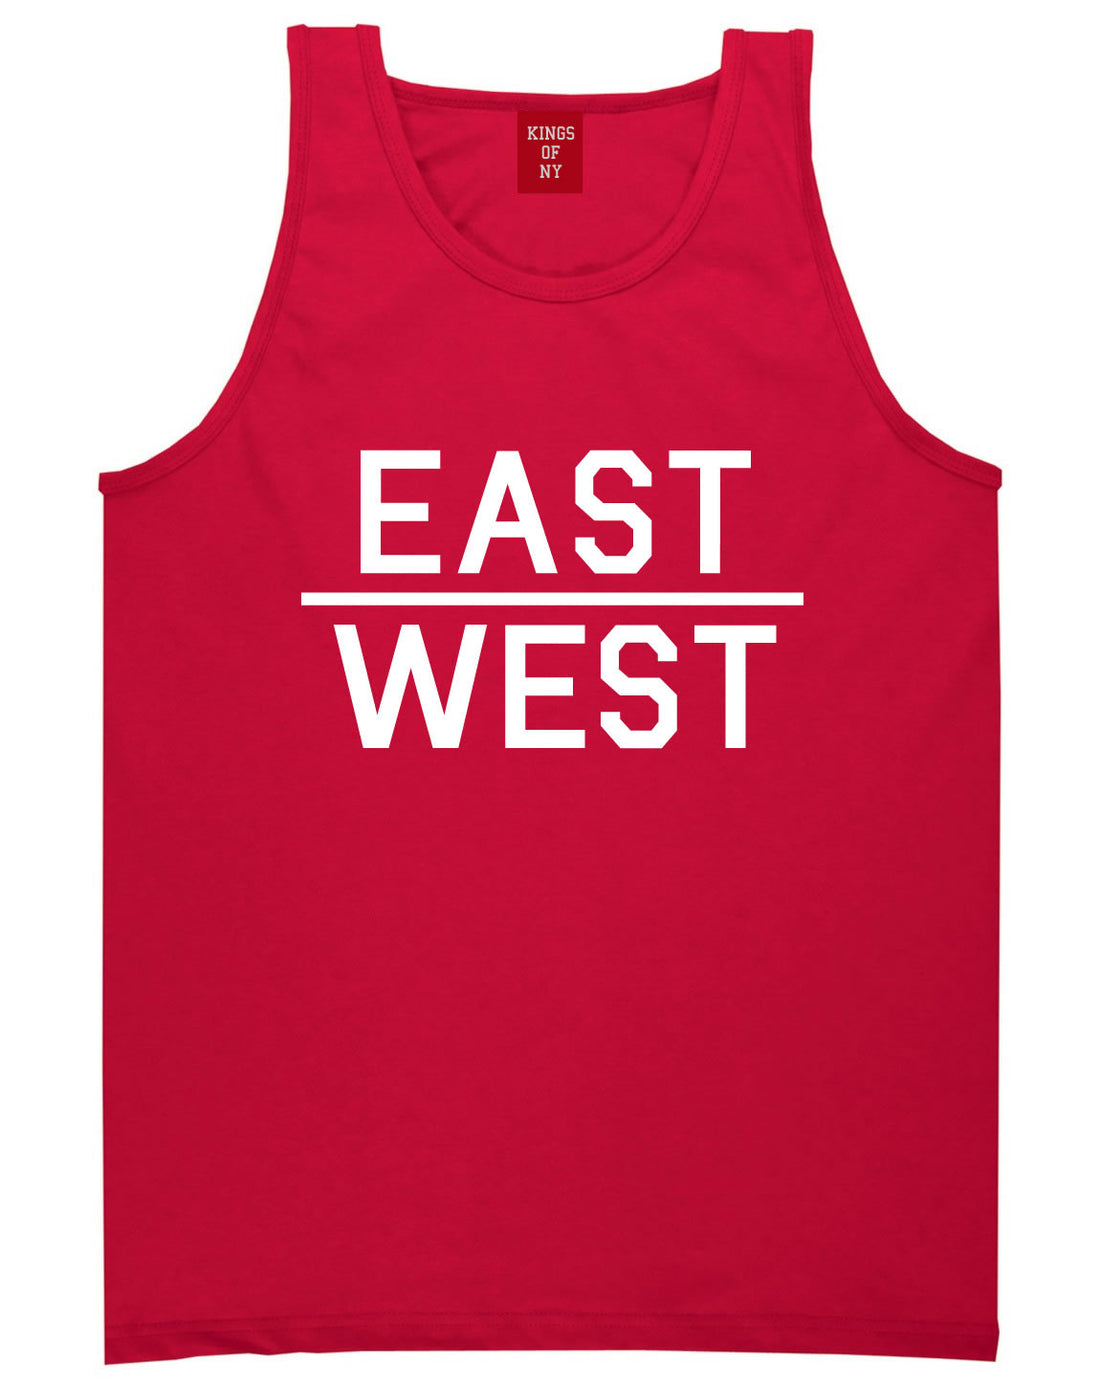 East West Tank Top in Red by Kings Of NY